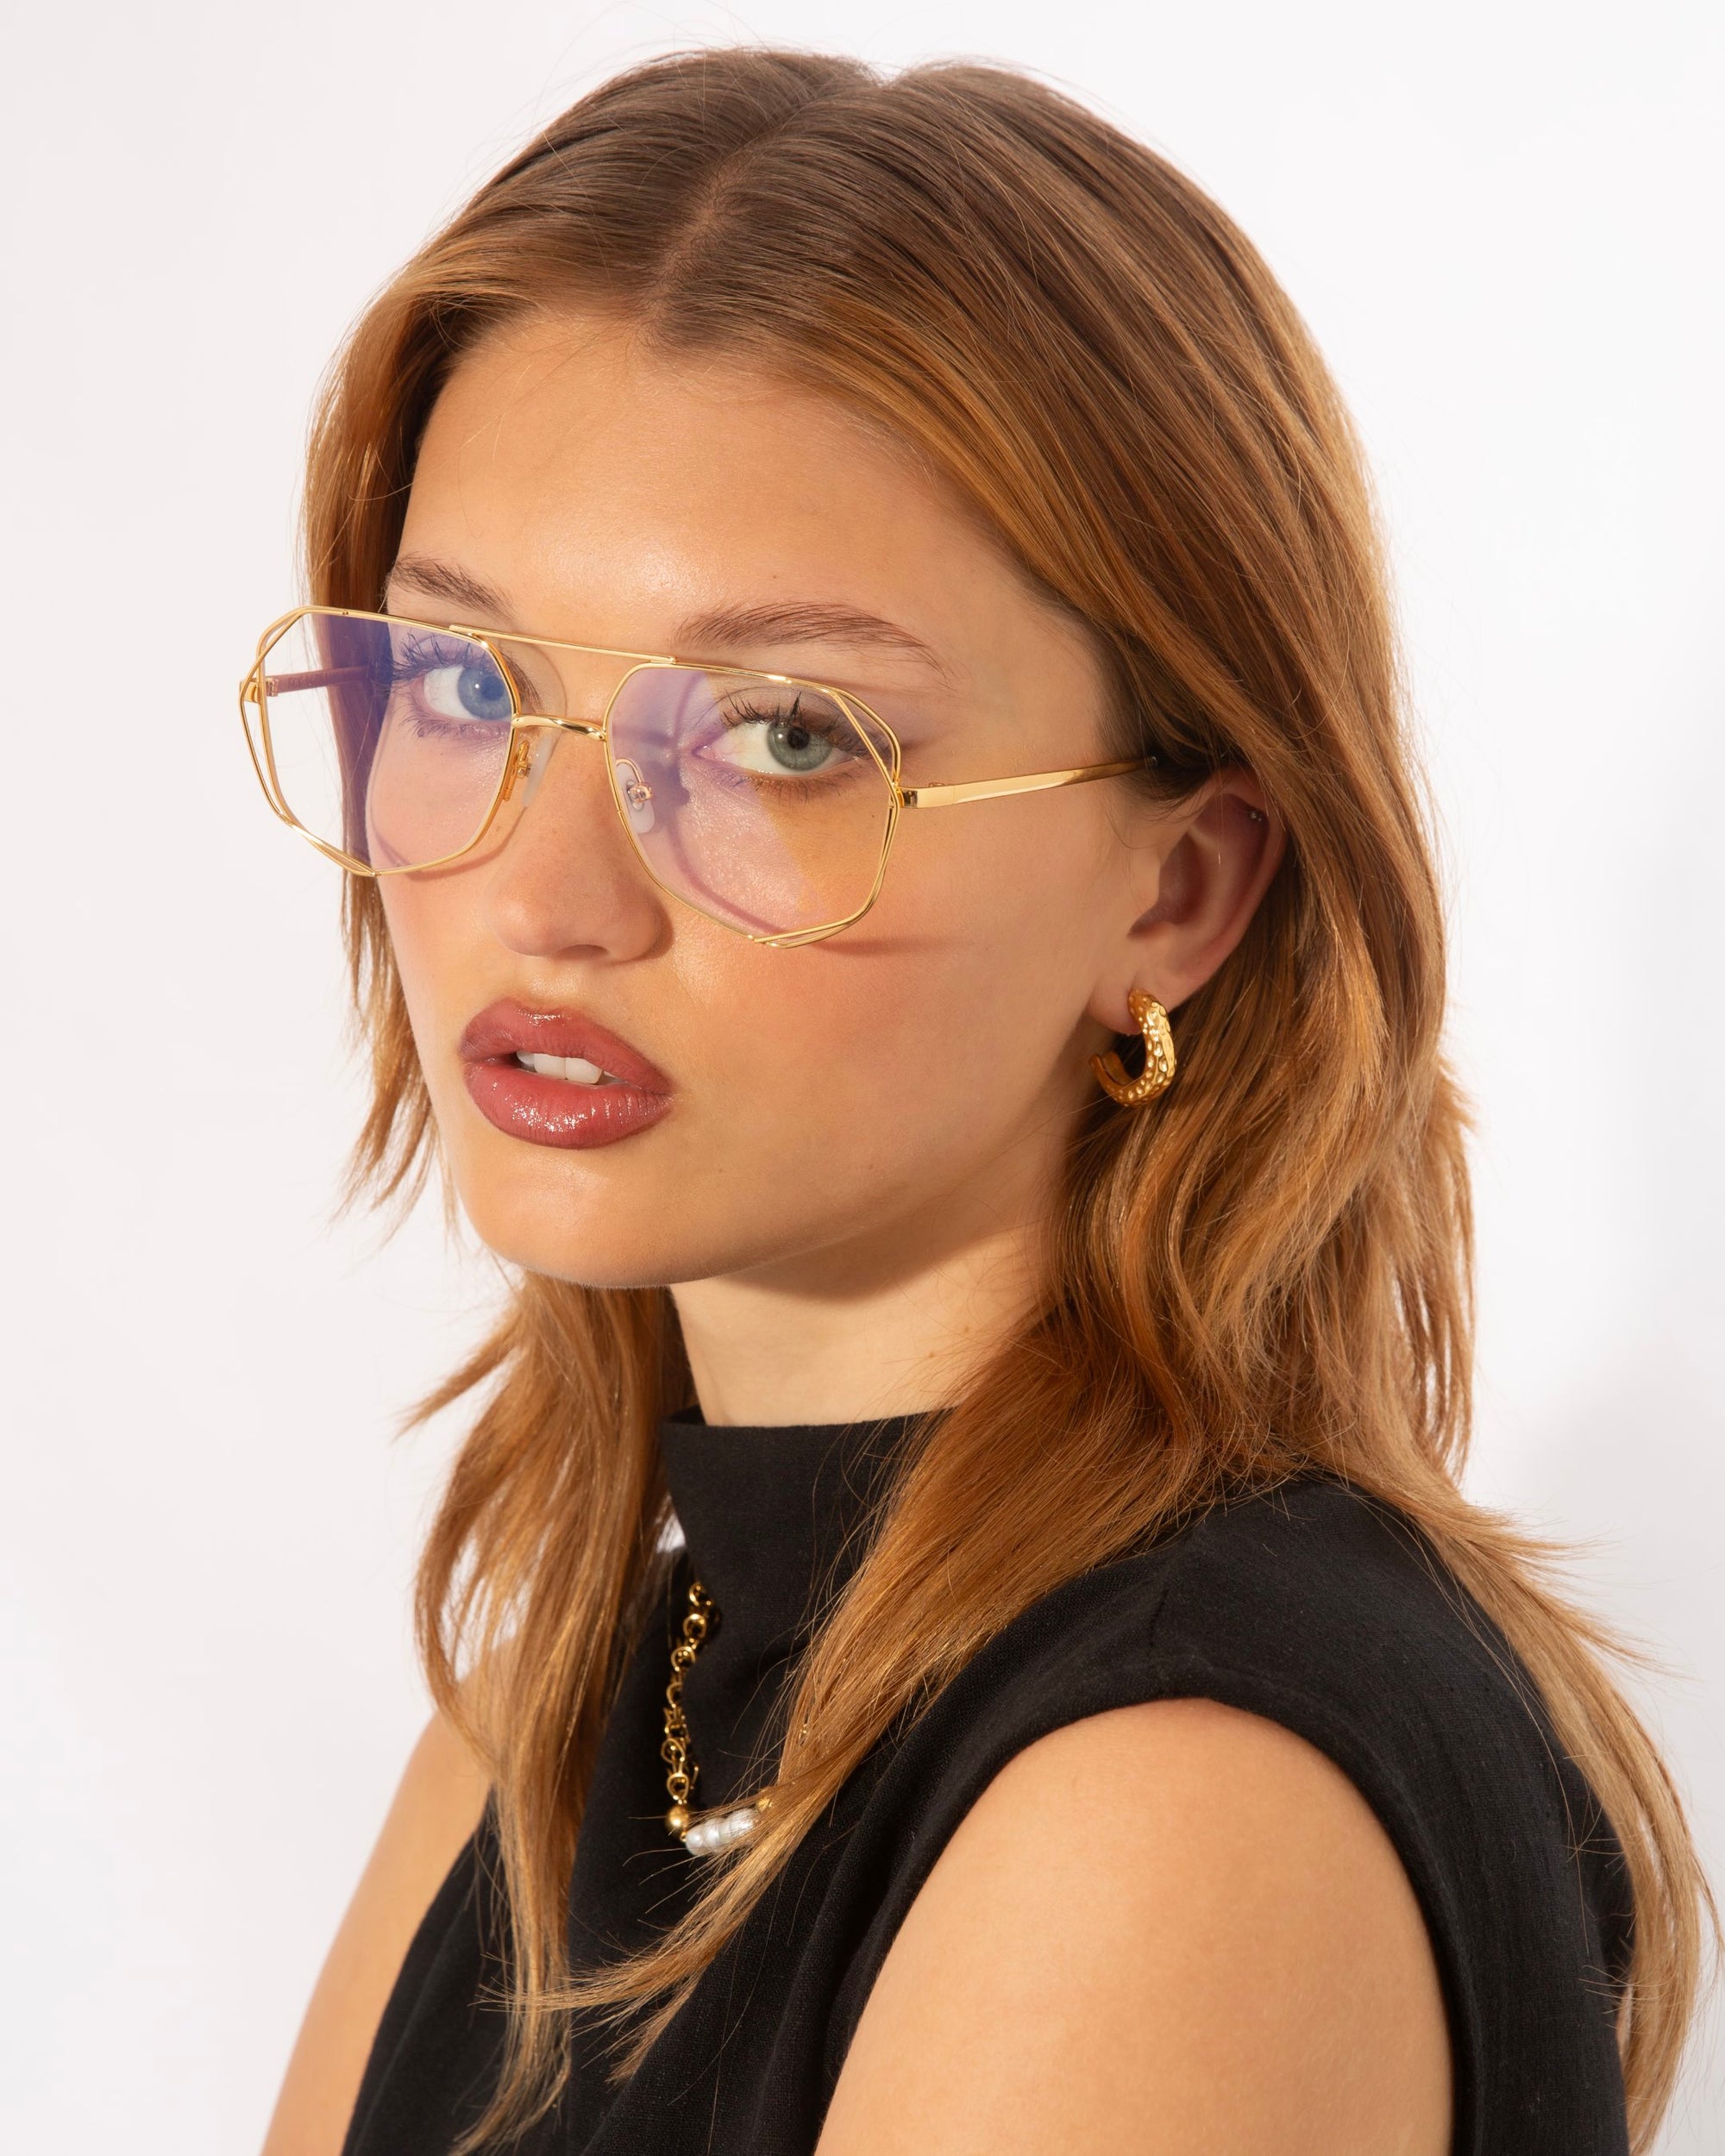 A person with shoulder-length, light brown hair wears large, gold-rimmed glasses featuring UV protection lenses with a purple tint. They have gold hoop earrings and a necklace and are dressed in a sleeveless black top. The person looks directly at the camera against a plain white background, wearing For Art's Sake® Genius Two glasses.